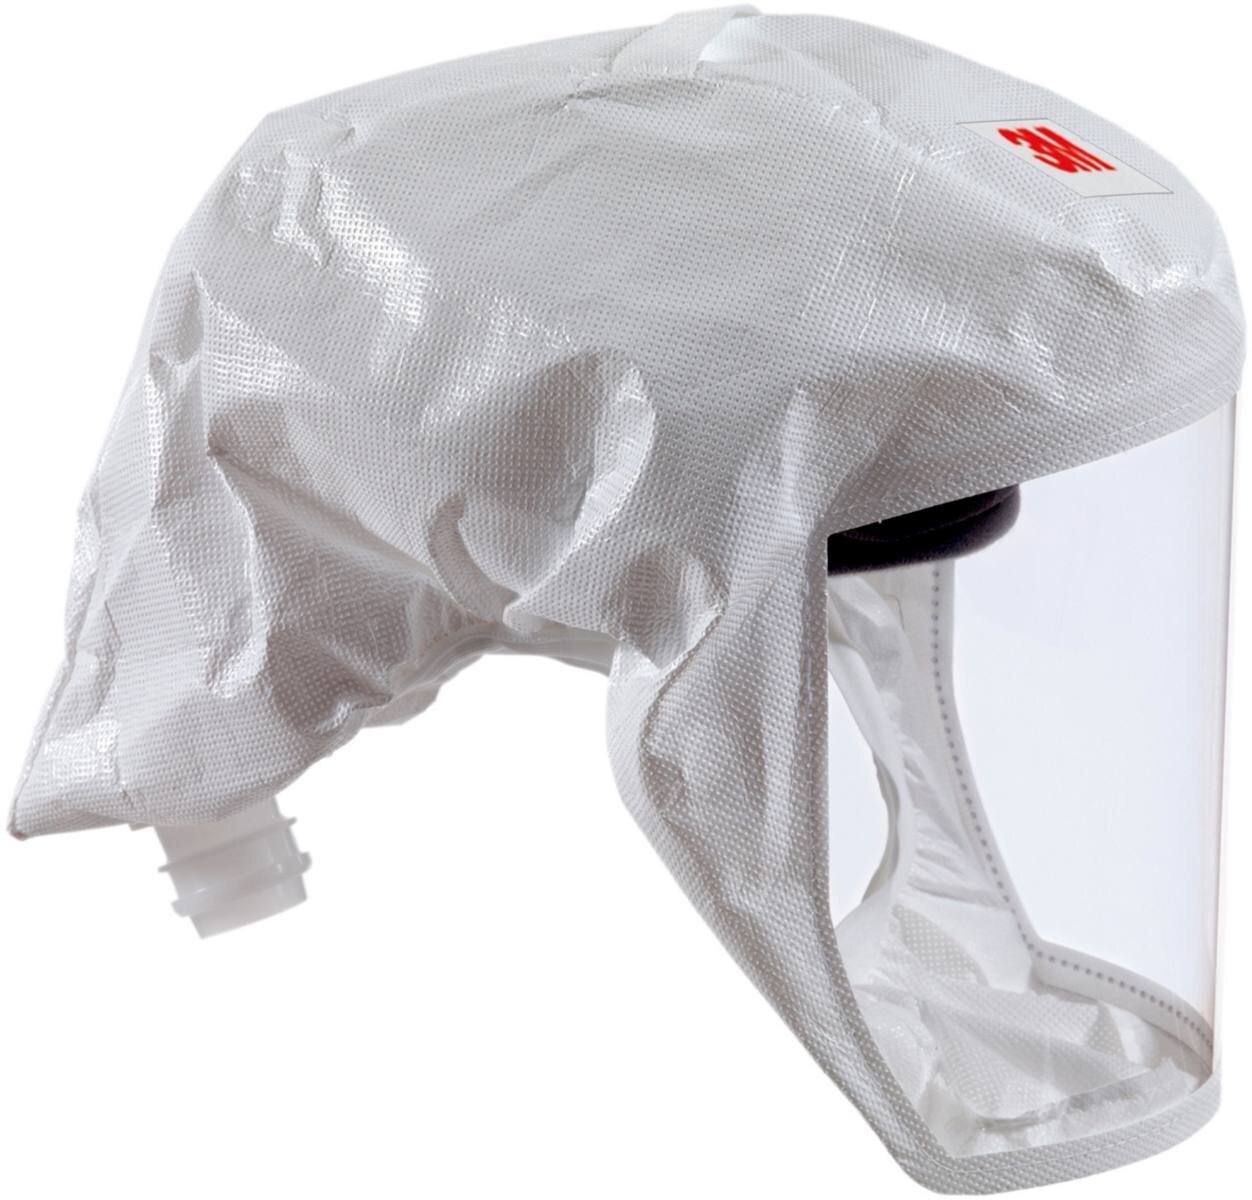 3M Versaflo disposable lightweight hood S133S, with integrated head holder, white, textile universal material, size S/M - Material: Web 24